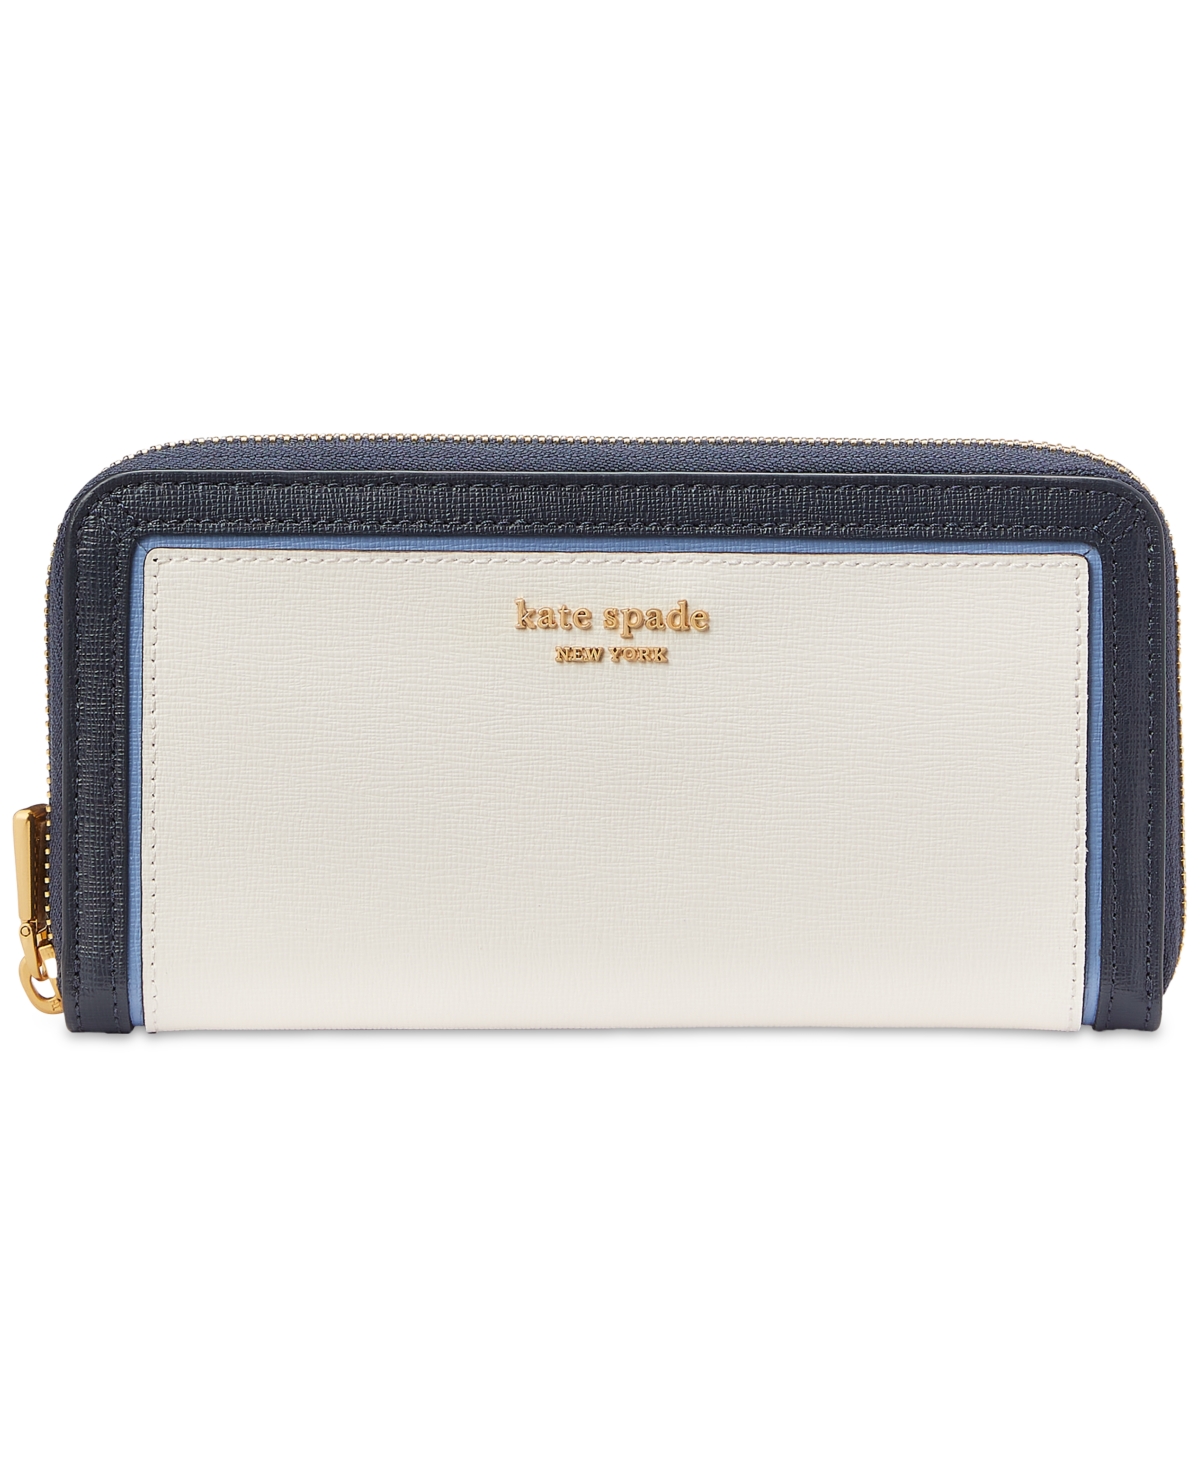 Kate Spade New York Morgan Colorblocked Saffiano Leather Zip-Around Continental Wallet